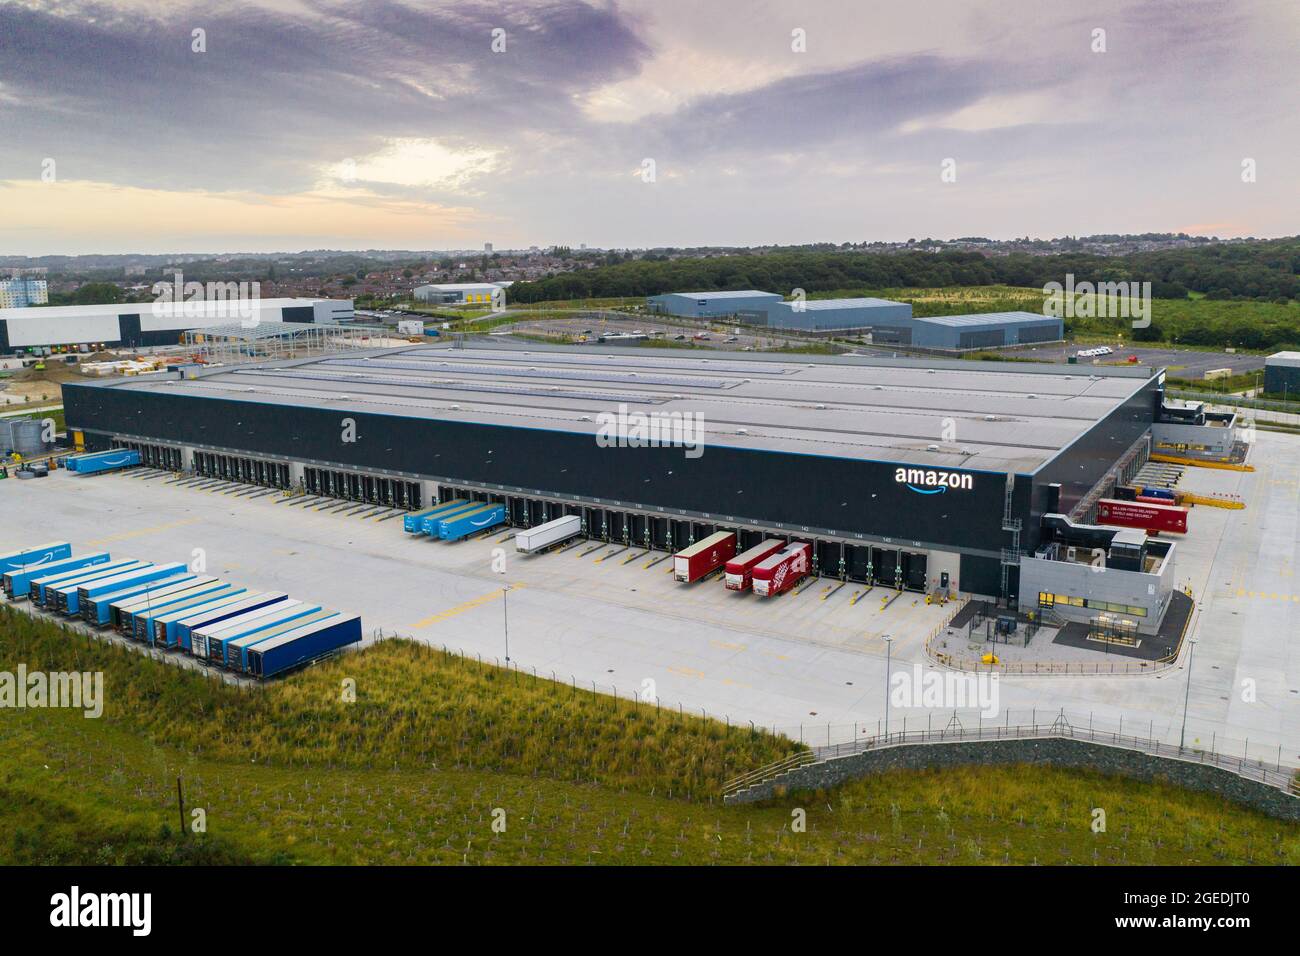 LEEDS, UK - AUGUST 13, 2021.  Aerial view of the Amazon warehouse and fulfillment centre in Leeds, West Yorkshire. Stock Photo